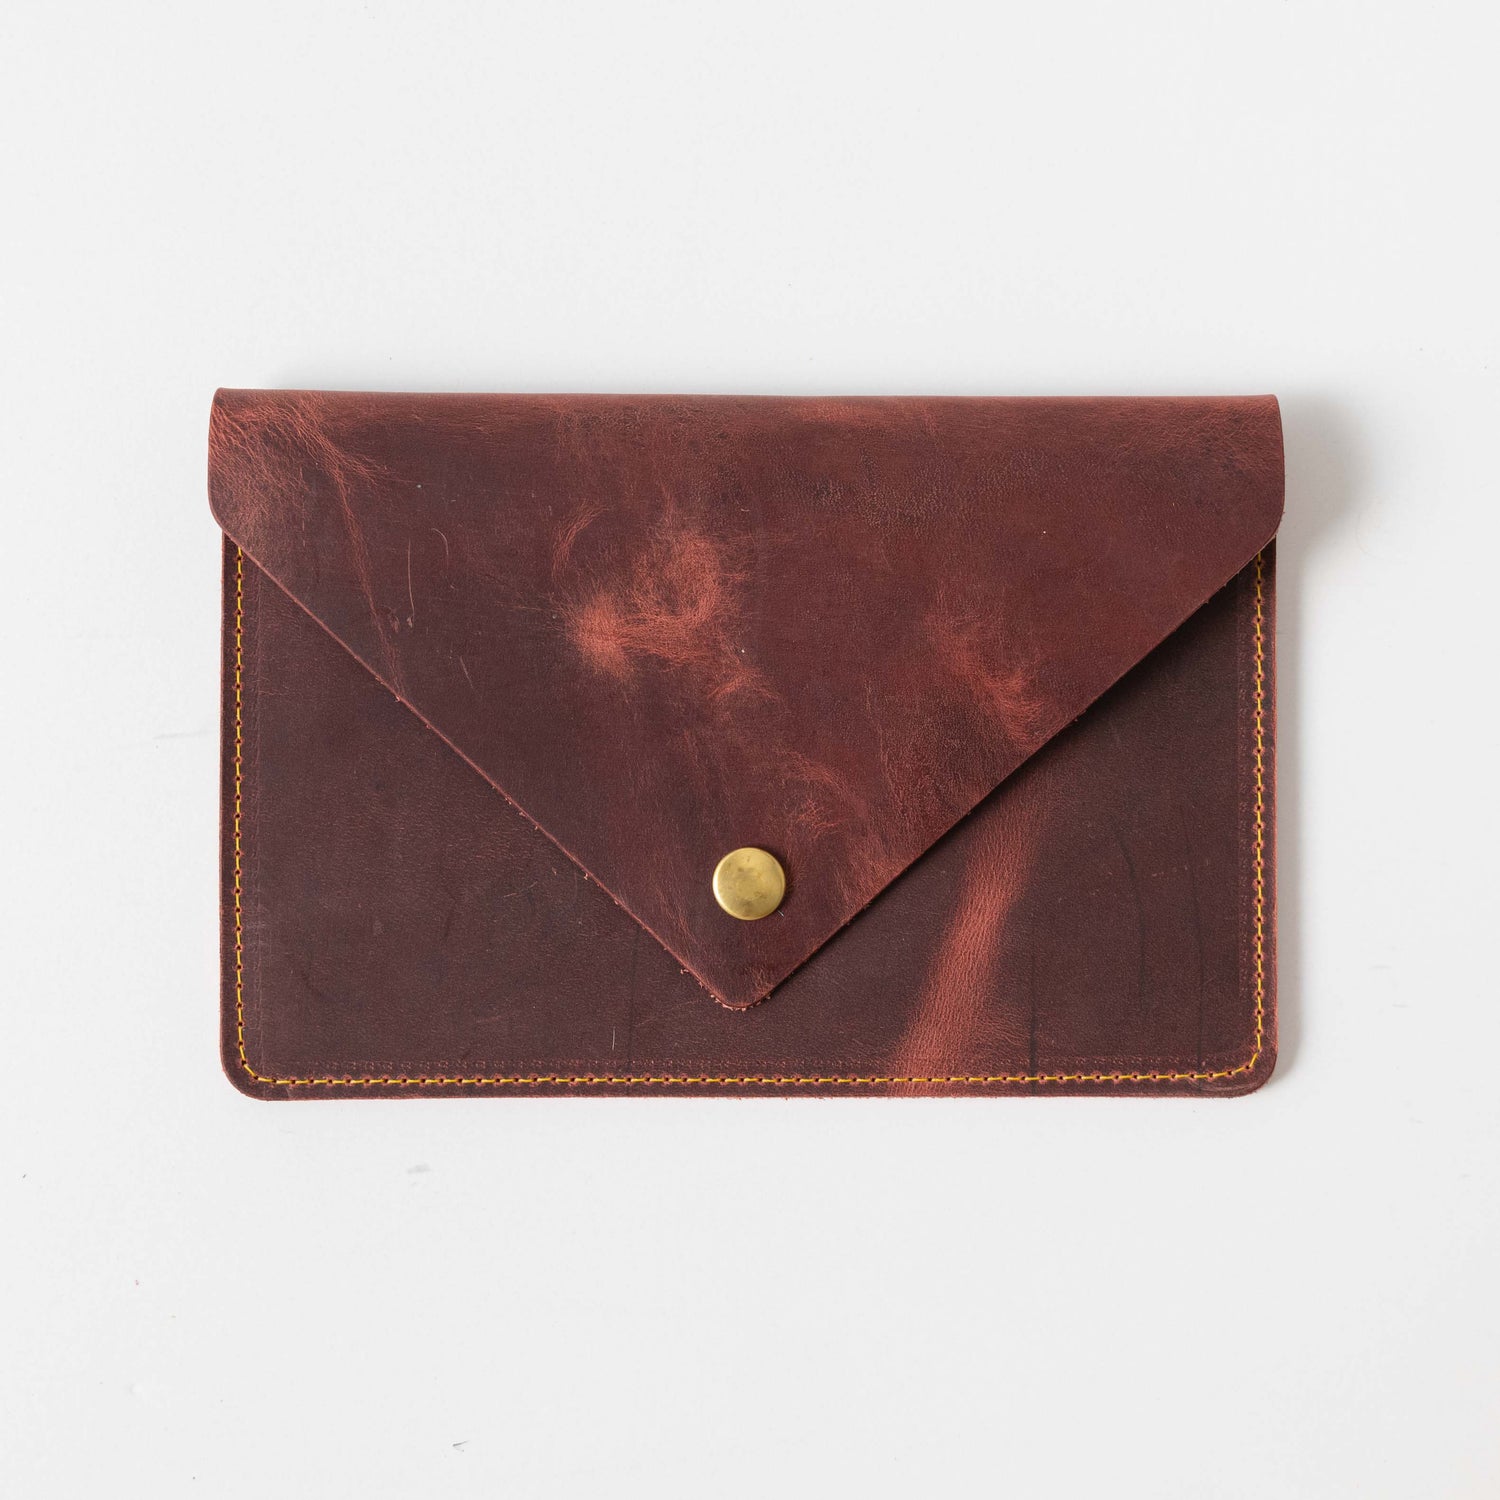 Mulberry Leather Clutch